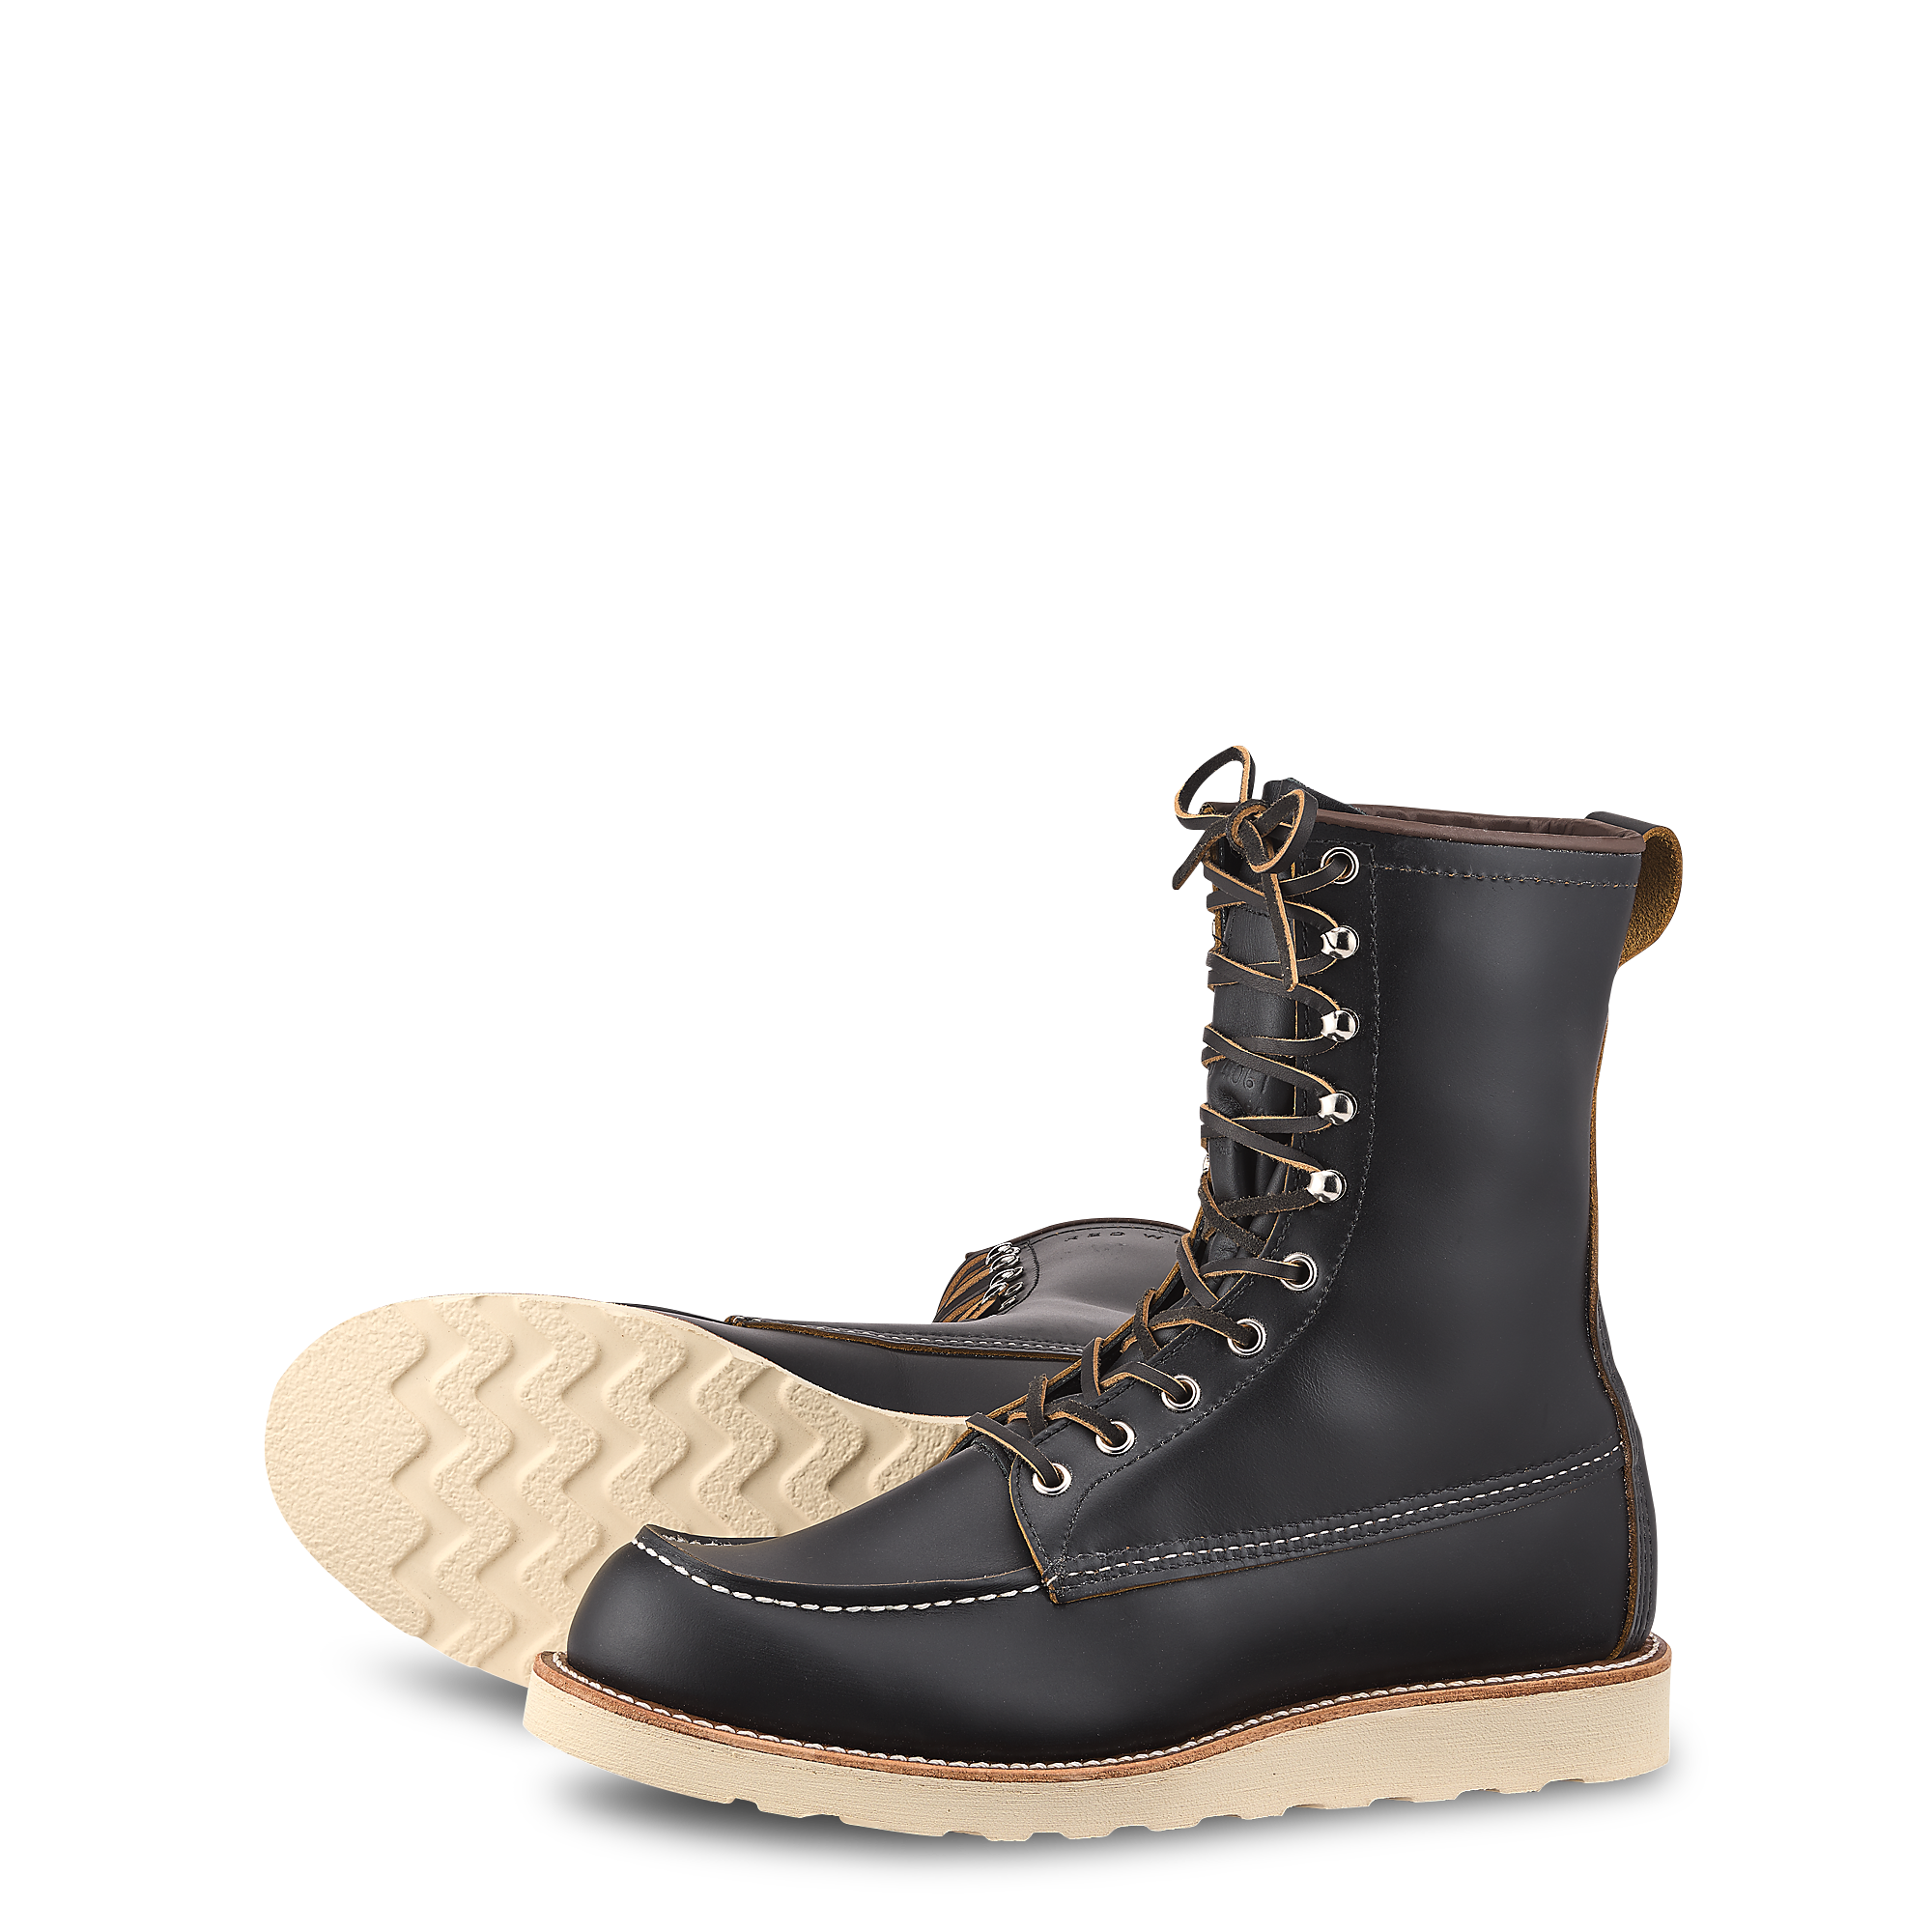 red wing boots clarksville in cheap online